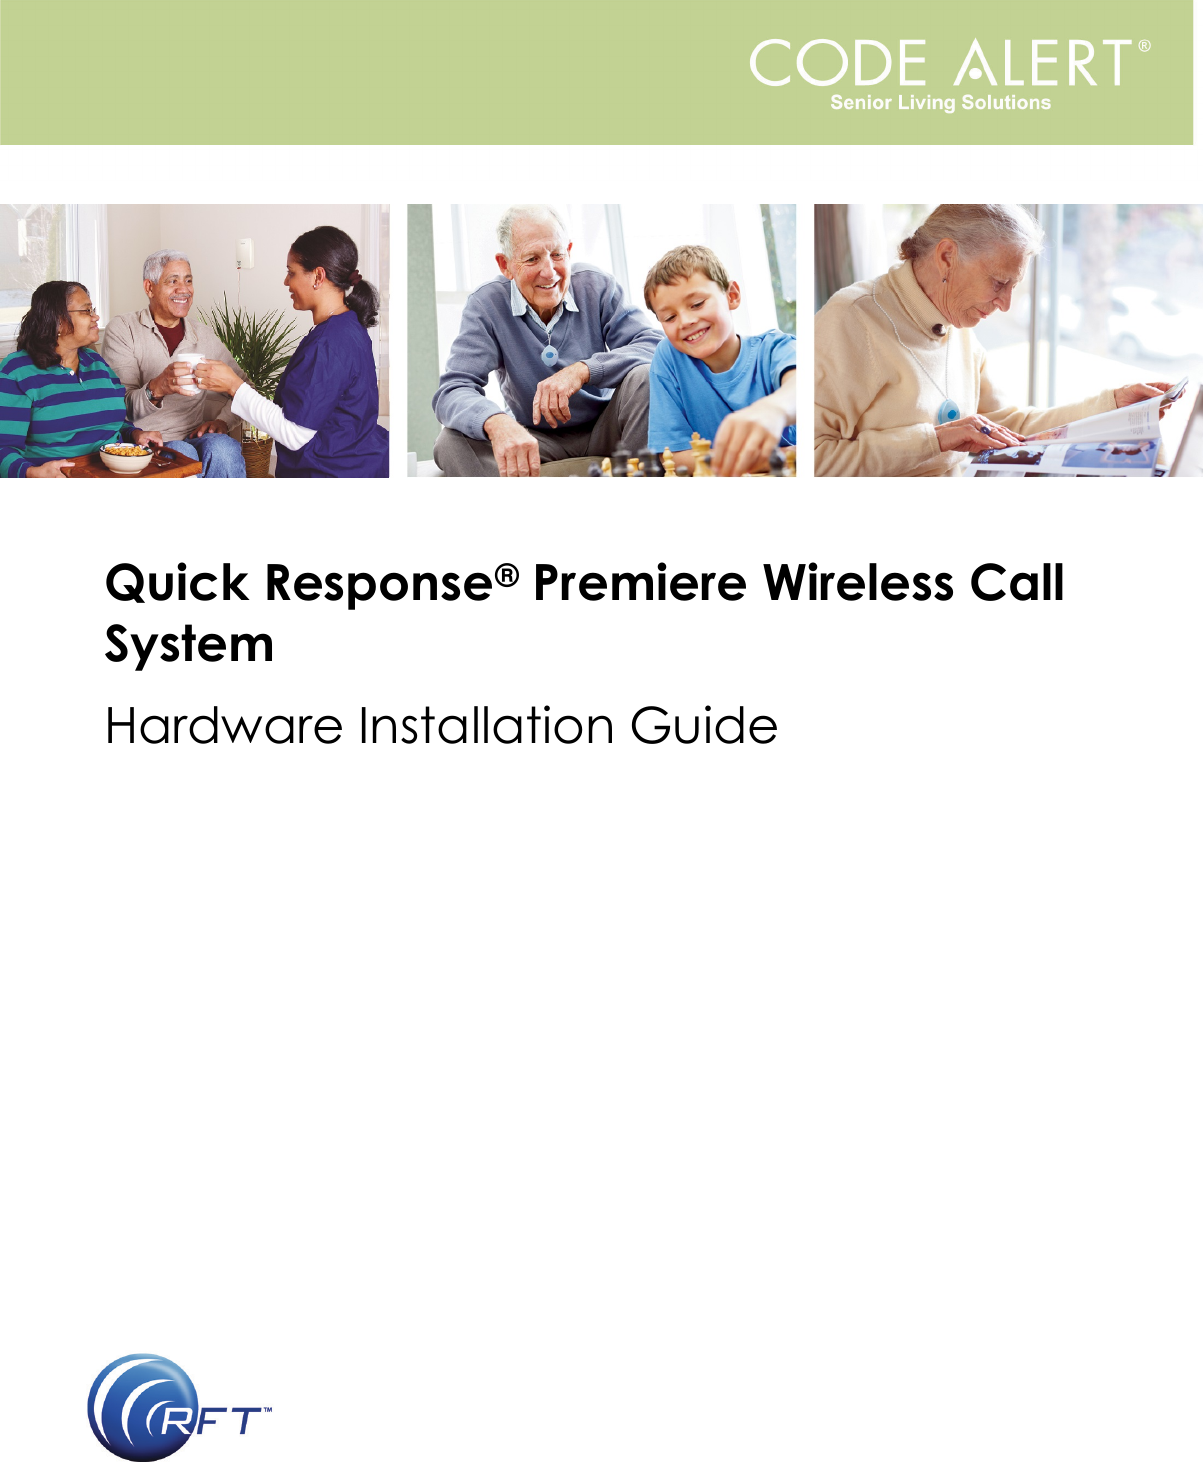      Quick Response® Premiere Wireless Call System Hardware Installation Guide                                          